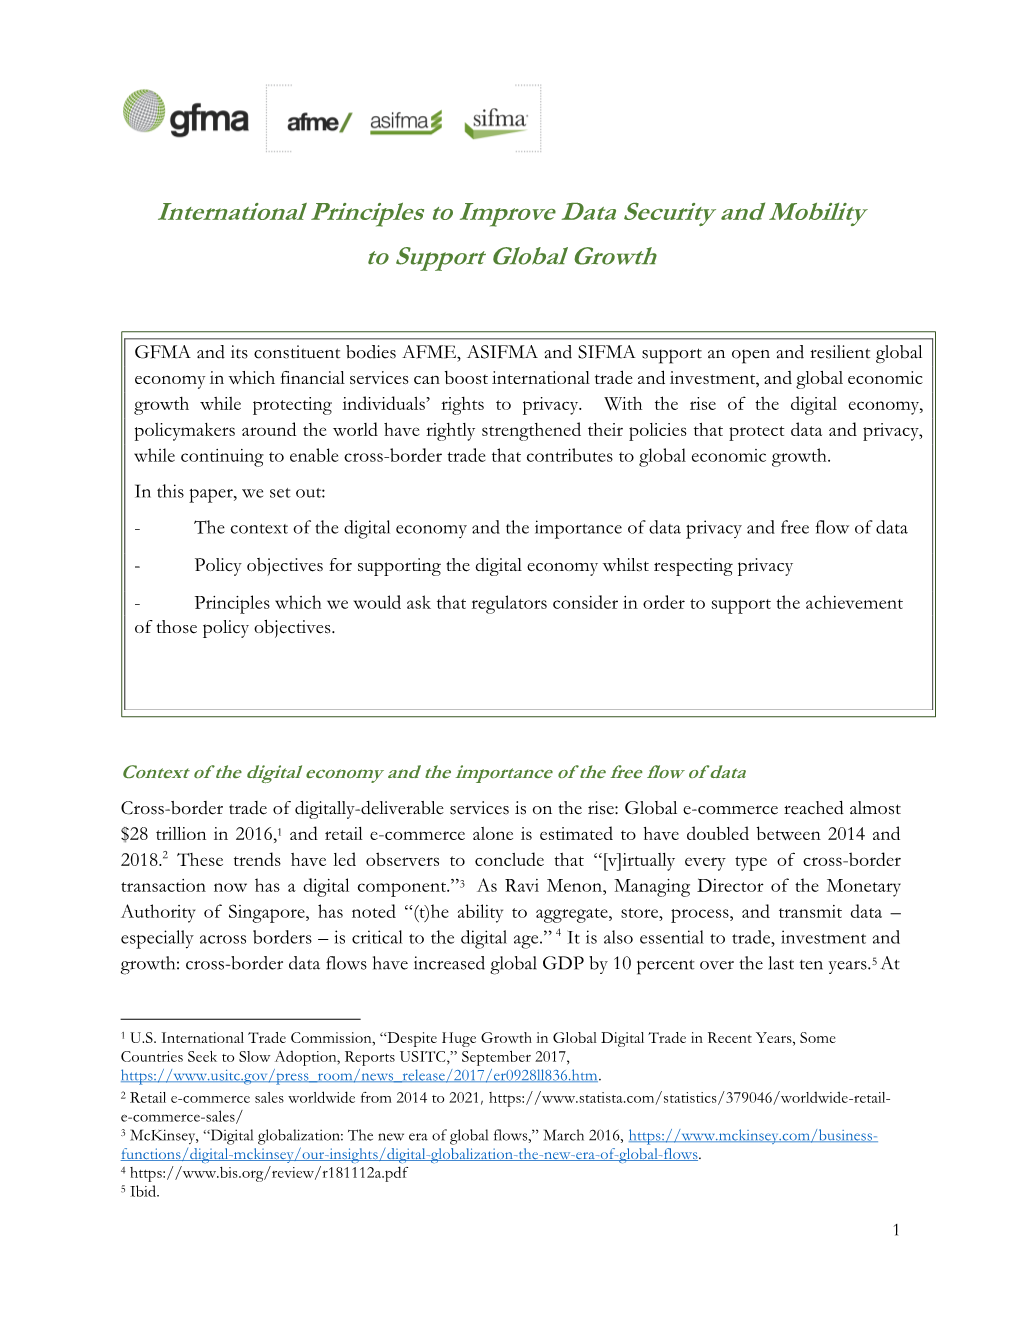 International Principles to Improve Data Security and Mobility to Support Global Growth